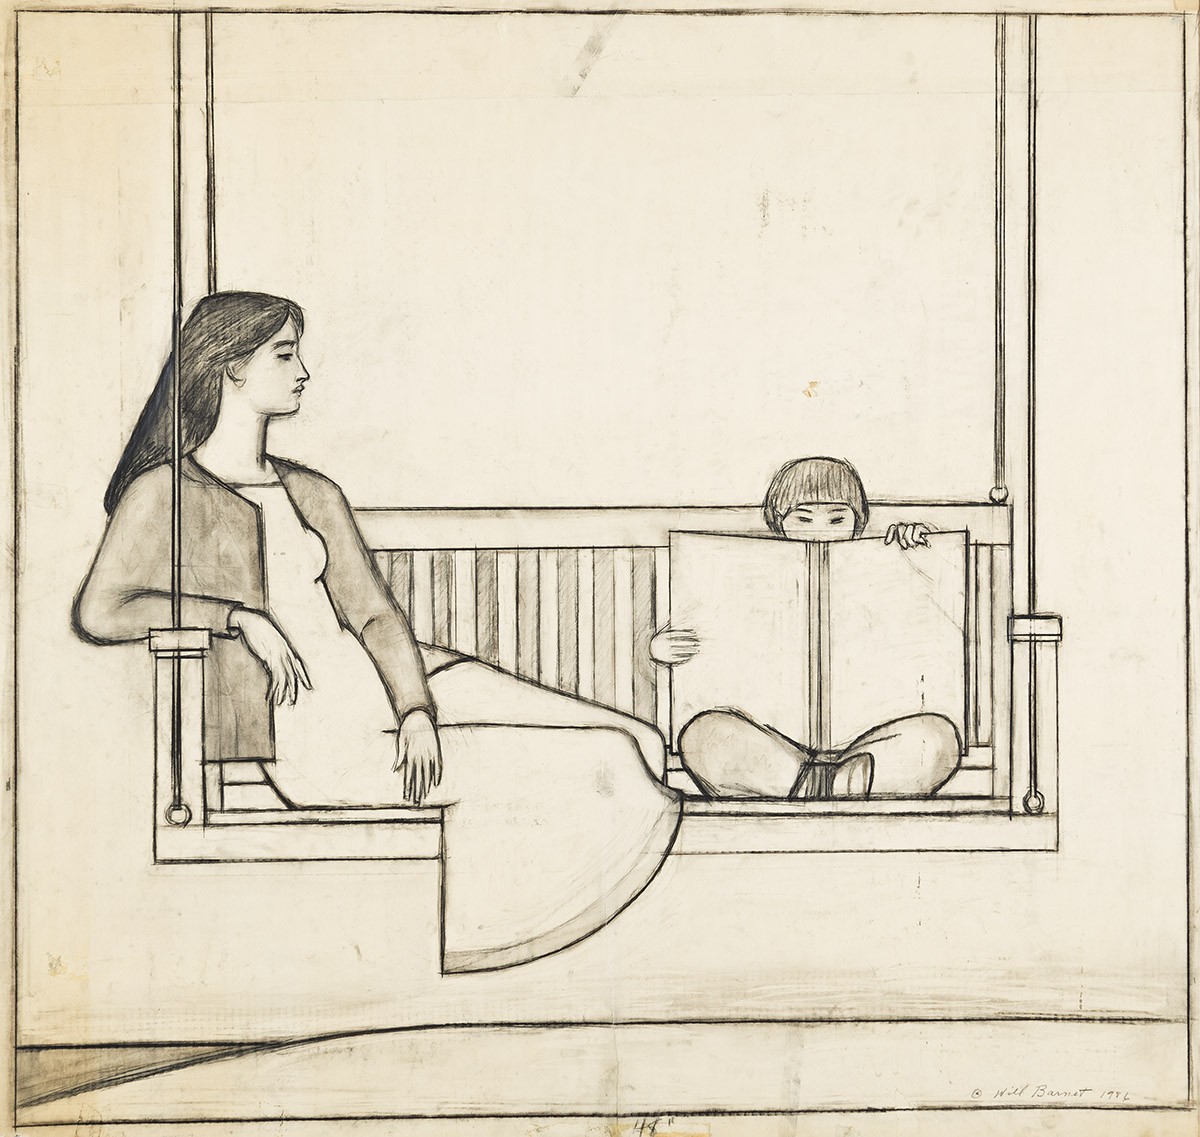 WILL BARNET Study for Summer (The Swing).